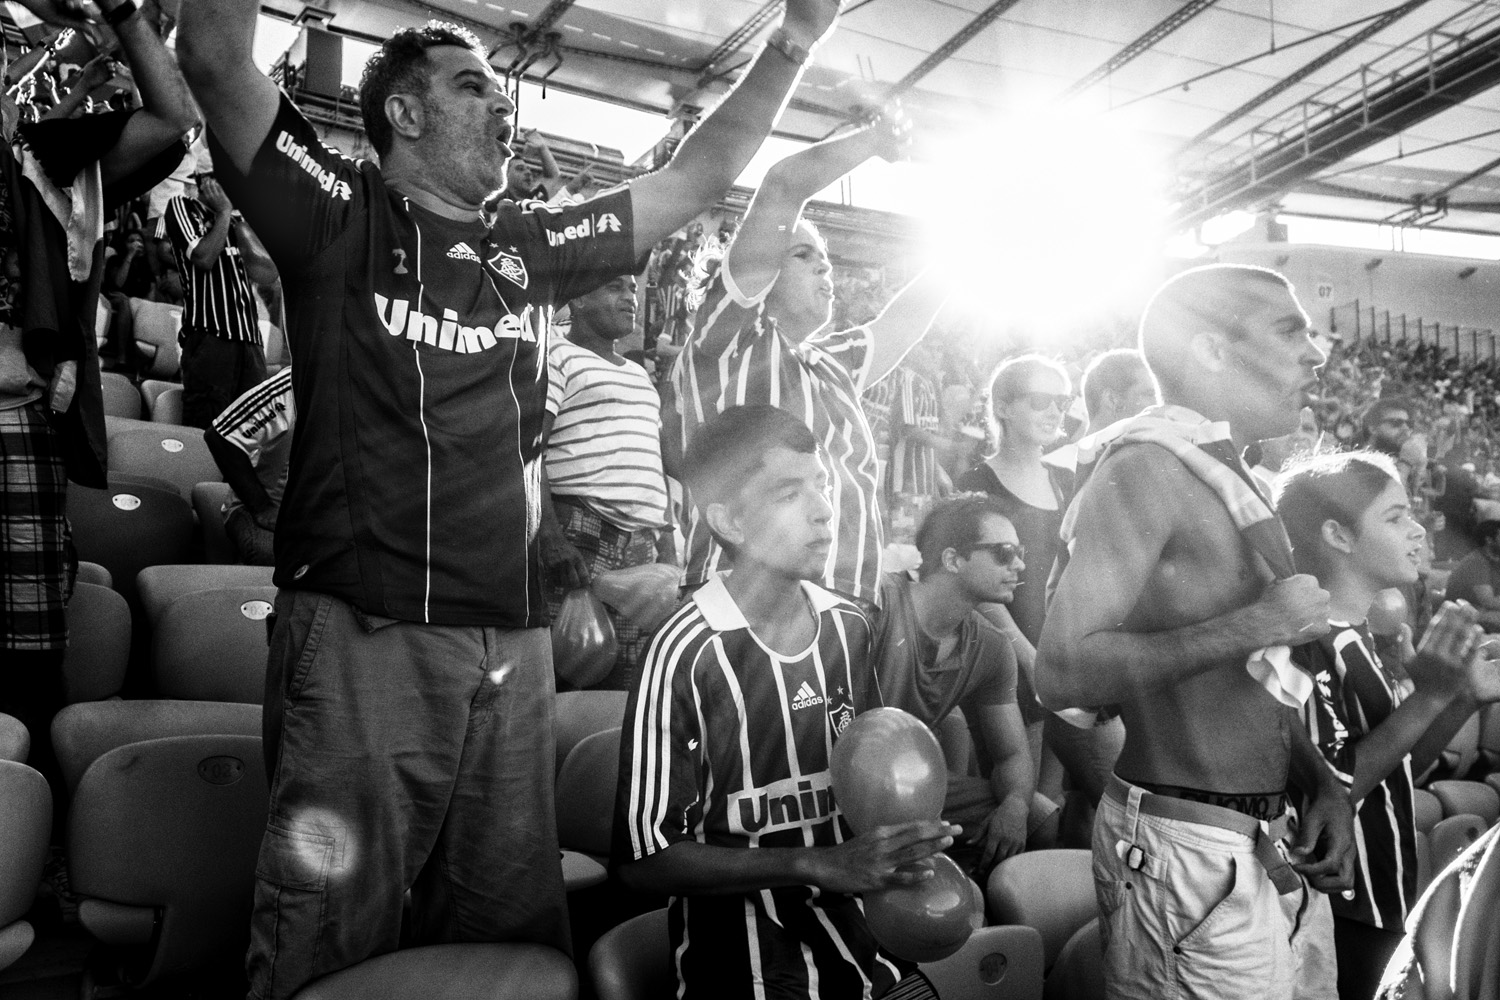 MARACANA STADIUM, RIO DE JANEIRO, BRAZIL - MAY 2014: Fans during a soccer game between the Fluminense and Flamengo, the two most important Rio´s teams. (Photo by Sebastián Liste/ Reportage by Getty Images)